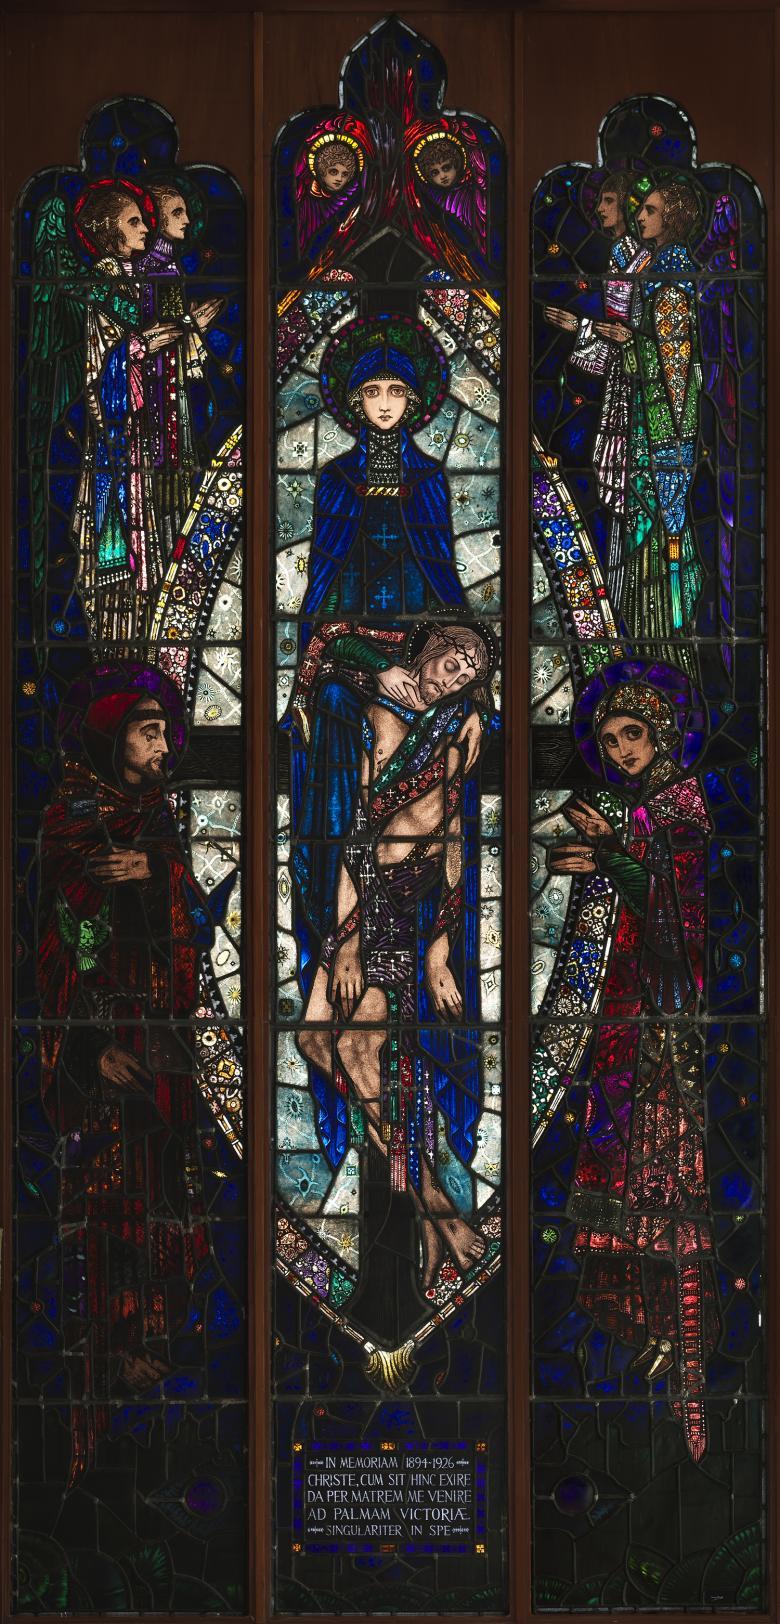 Harry Clarke (1889-1931), 'The Mother of Sorrows', 1926. © National Gallery of Ireland.